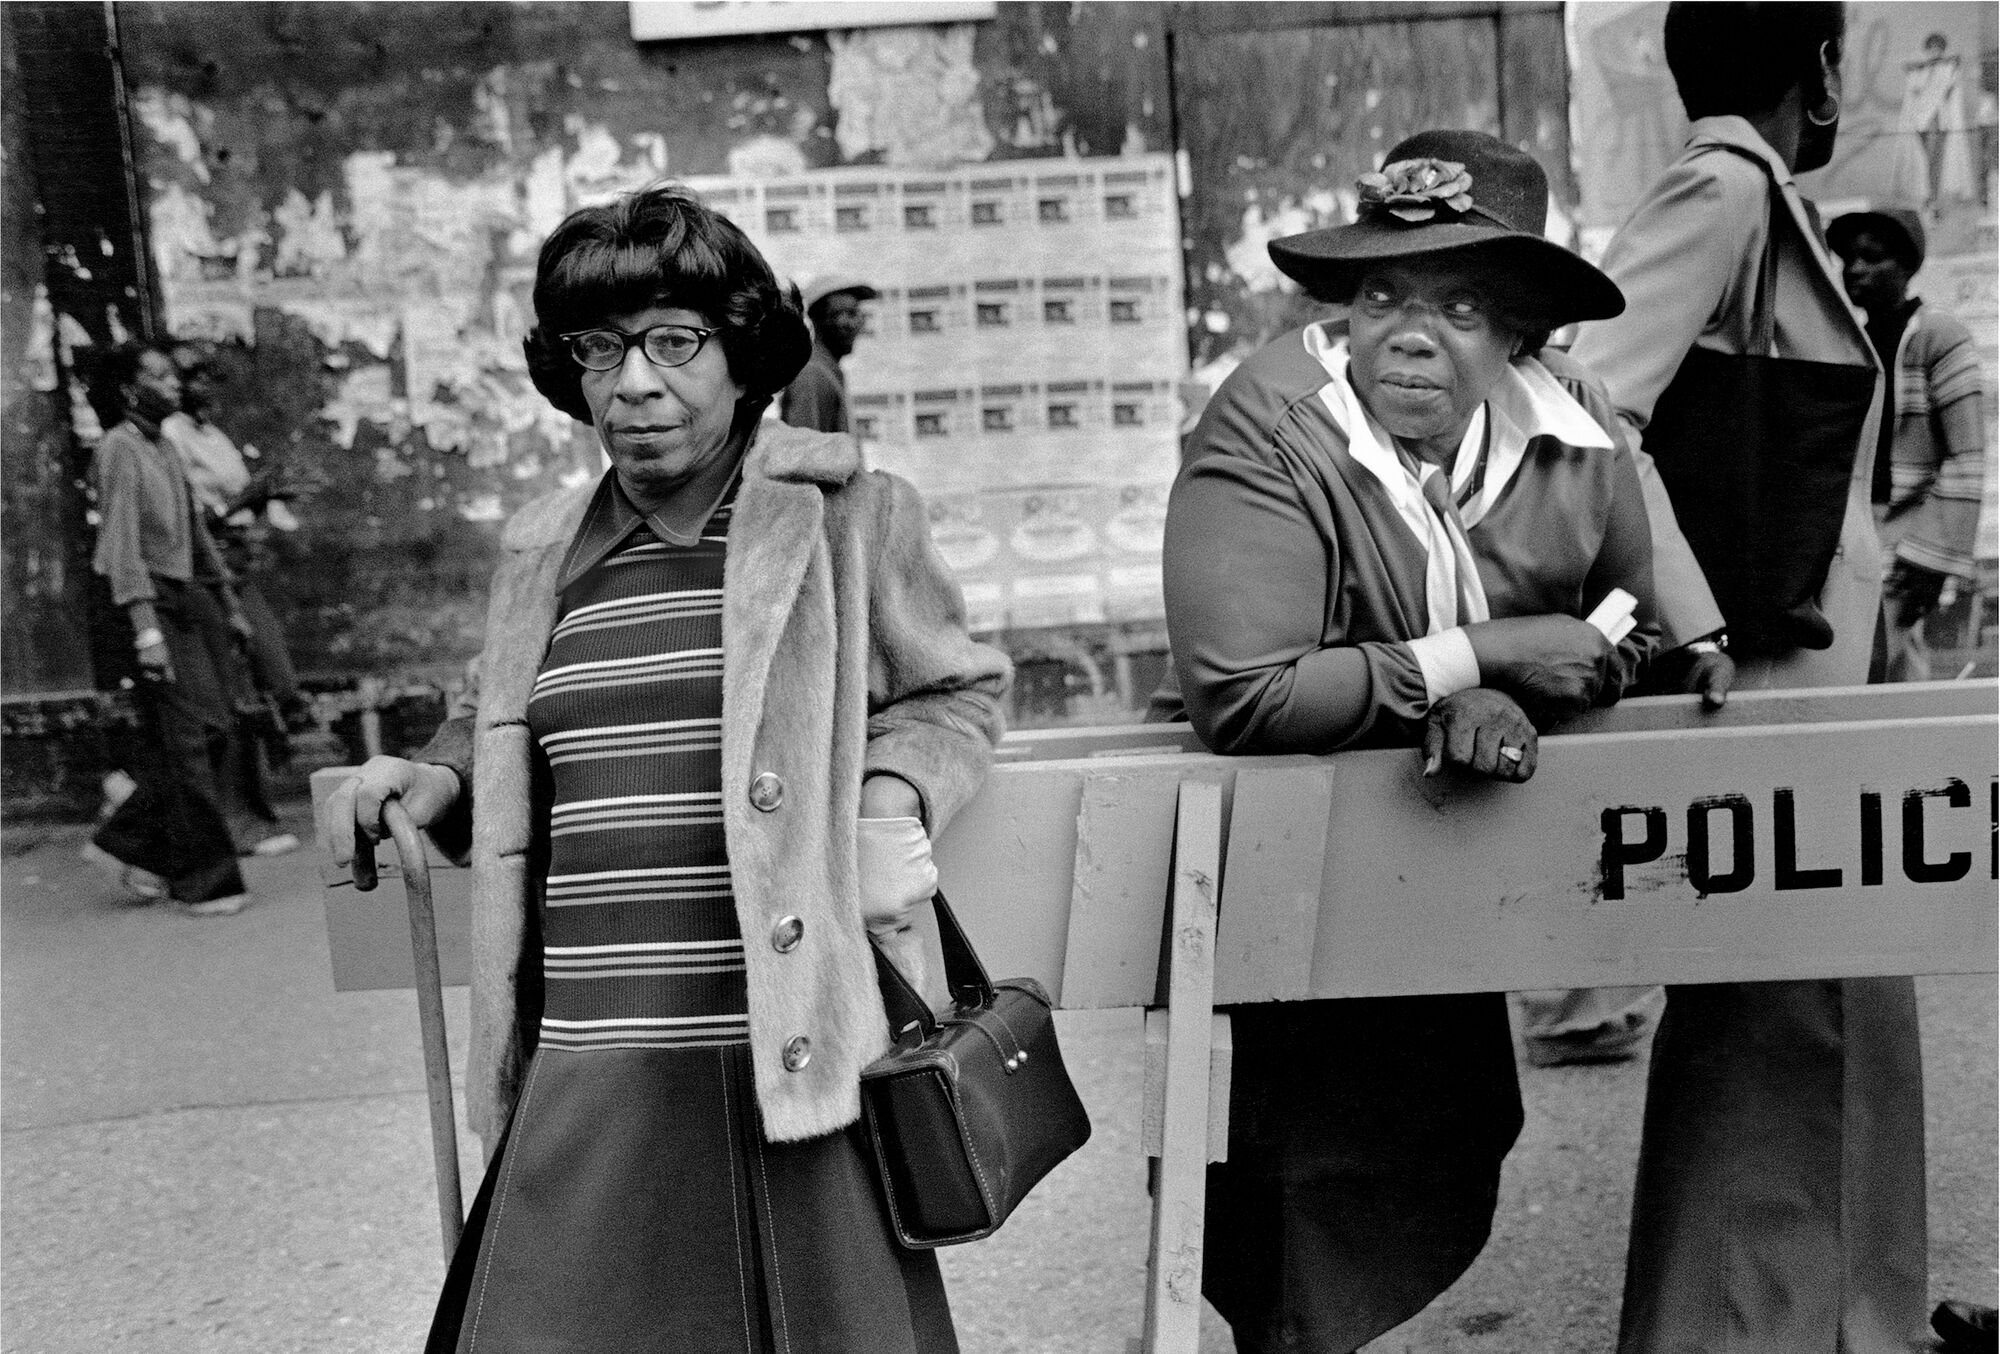 Two Women at a Parade, 1978, printed 1979, Dawoud Bey (American, born 1953), Gelatin silver print